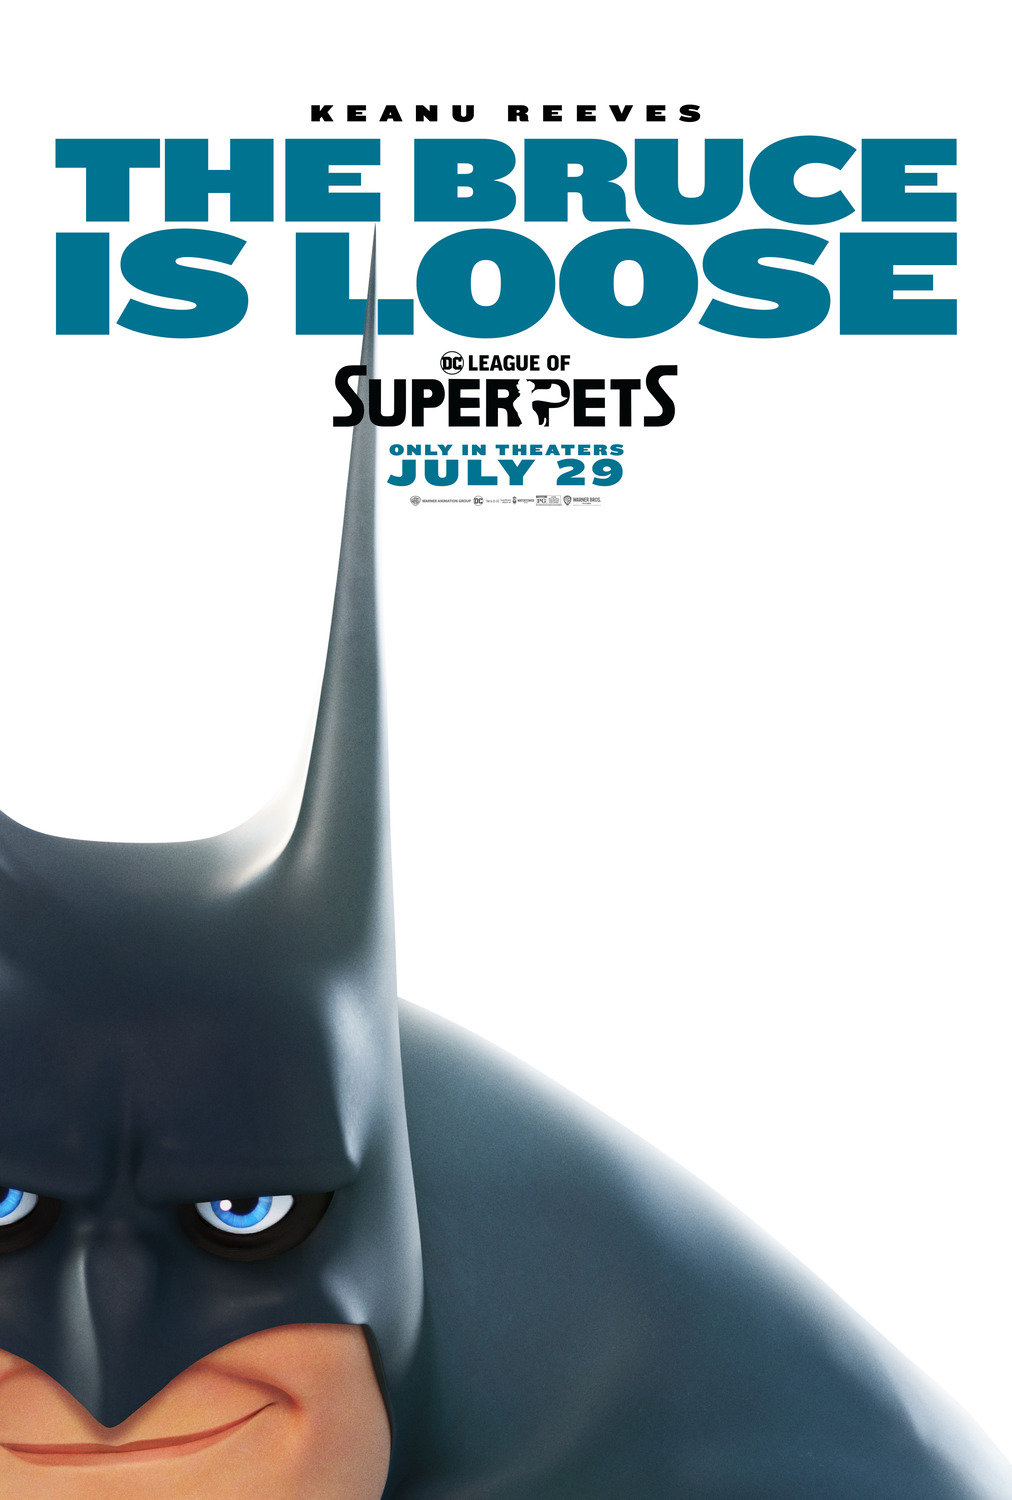 Extra Large Movie Poster Image for DC League of Super-Pets (#19 of 23)